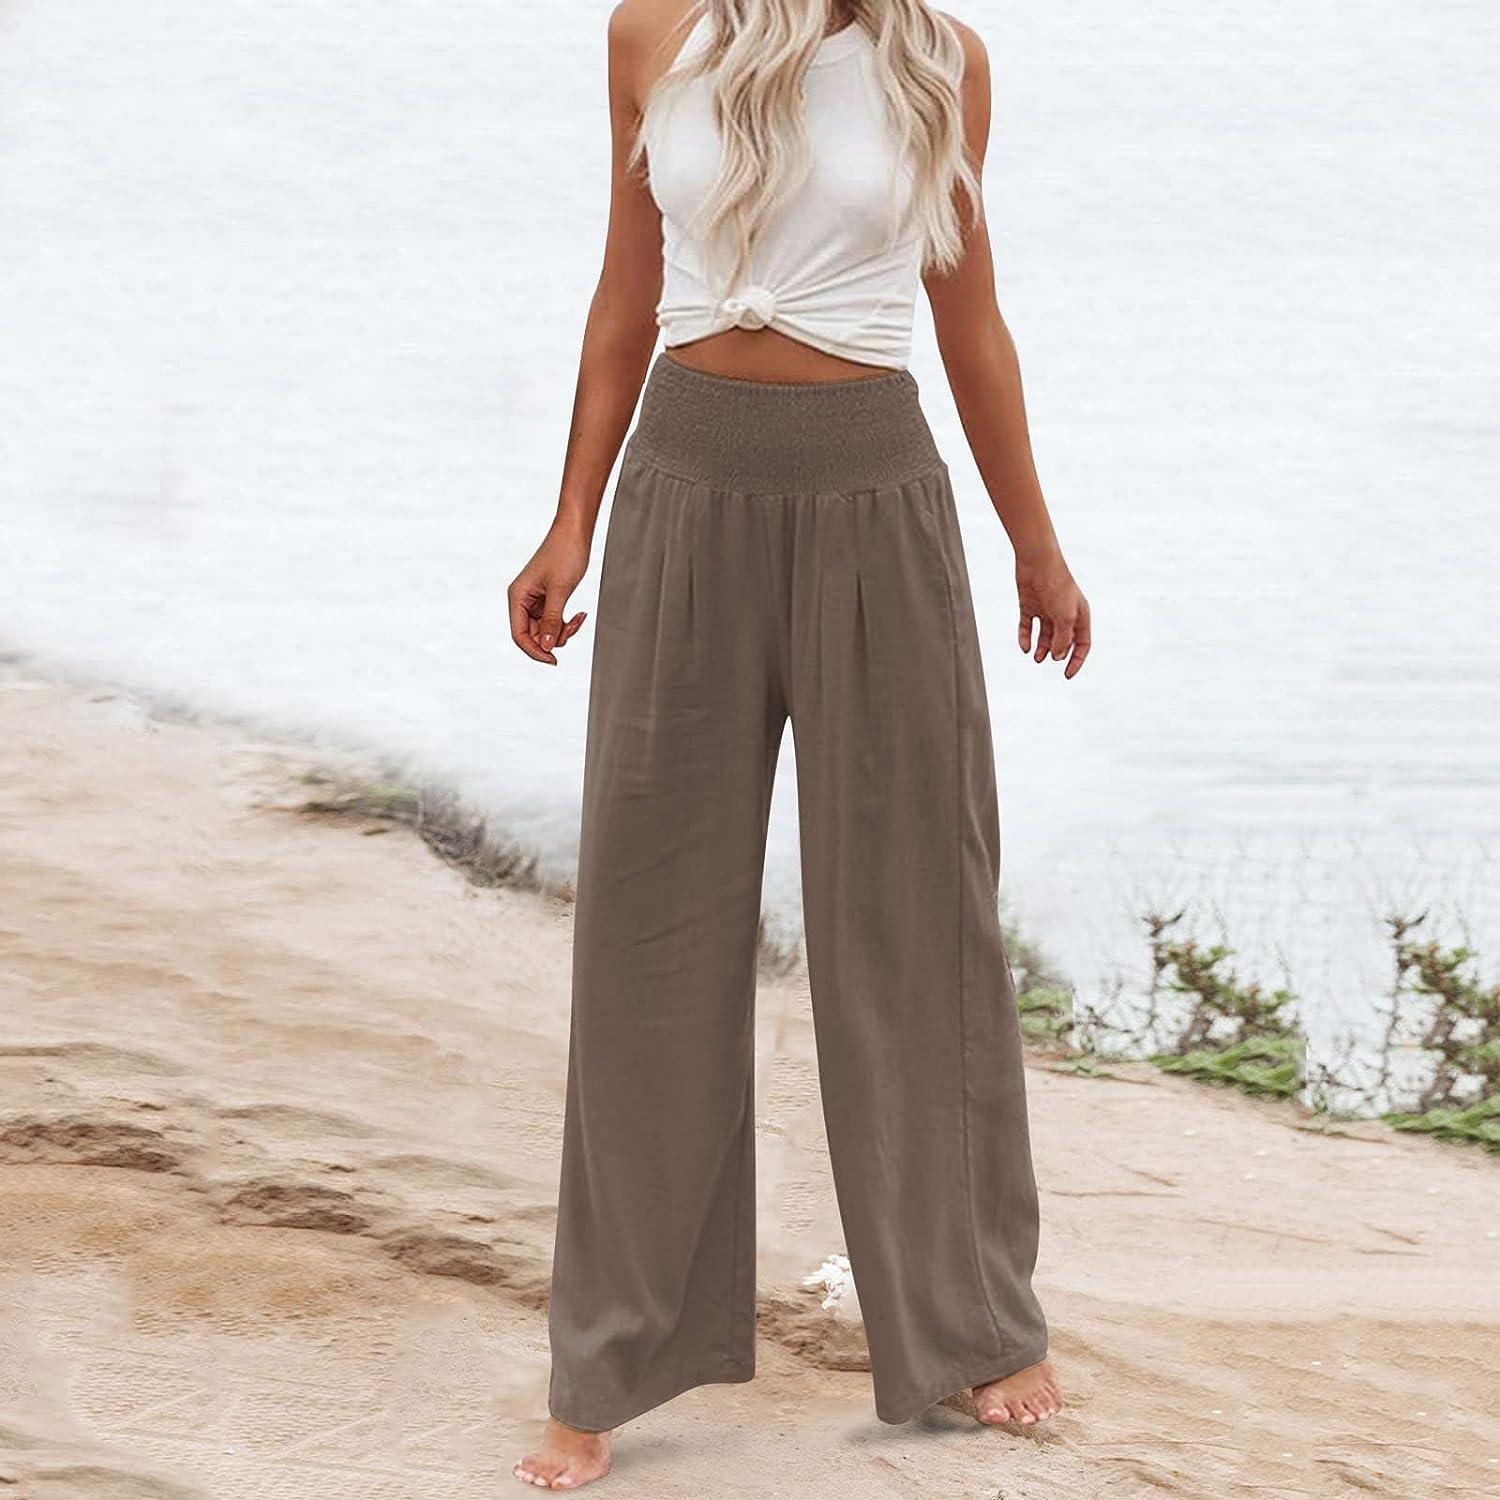 JEGULV Linen Pants for Women Casual Summer High Waist Wide Leg Palazzo  Lounge Pants Solid Baggy Pant Trousers with Pocket D01#coffee X-Large